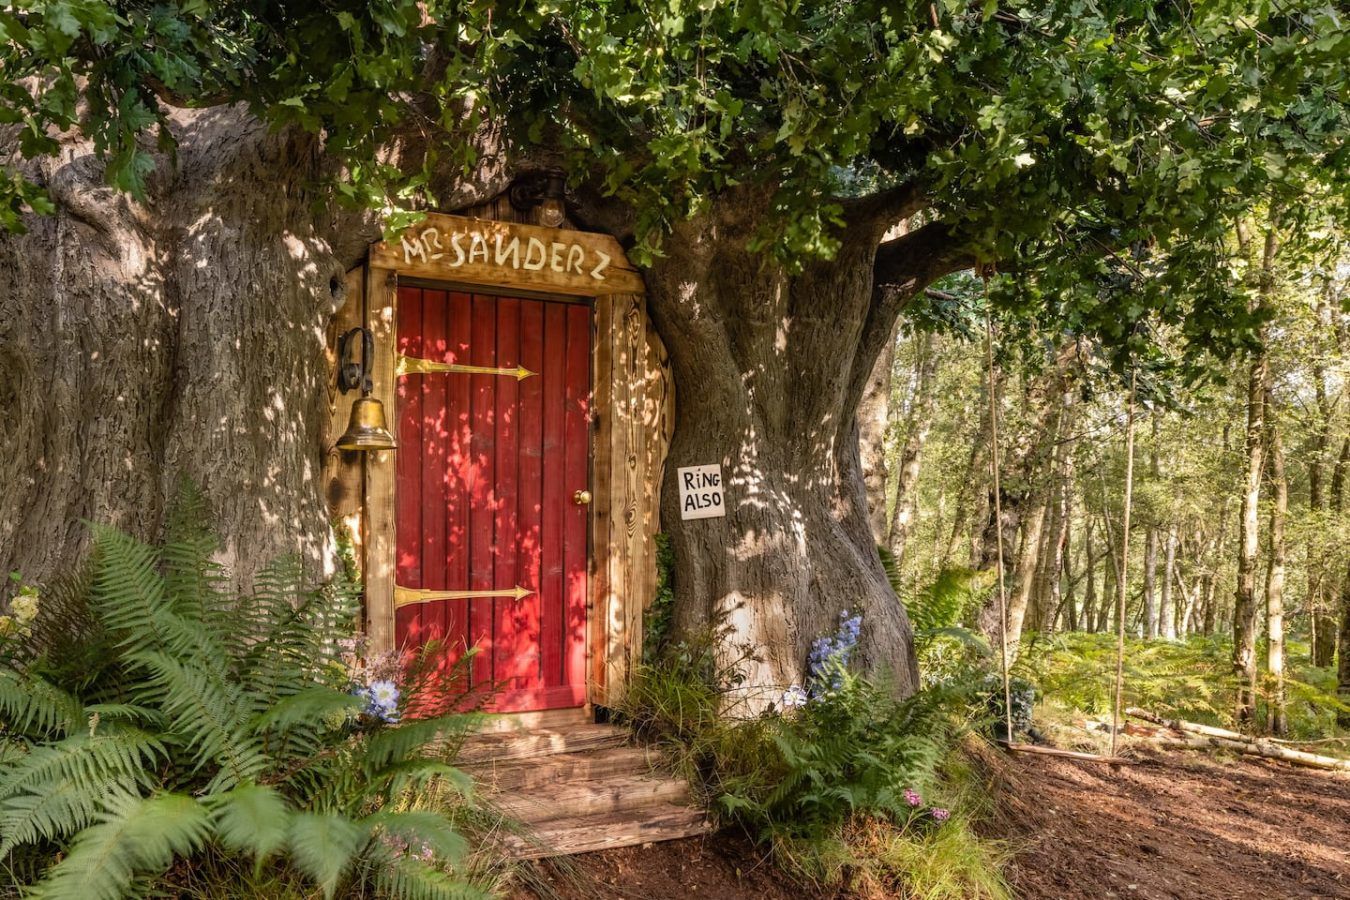 Airbnb x Disney recreate Hundred Acre Wood Treehouse from Winnie the Pooh